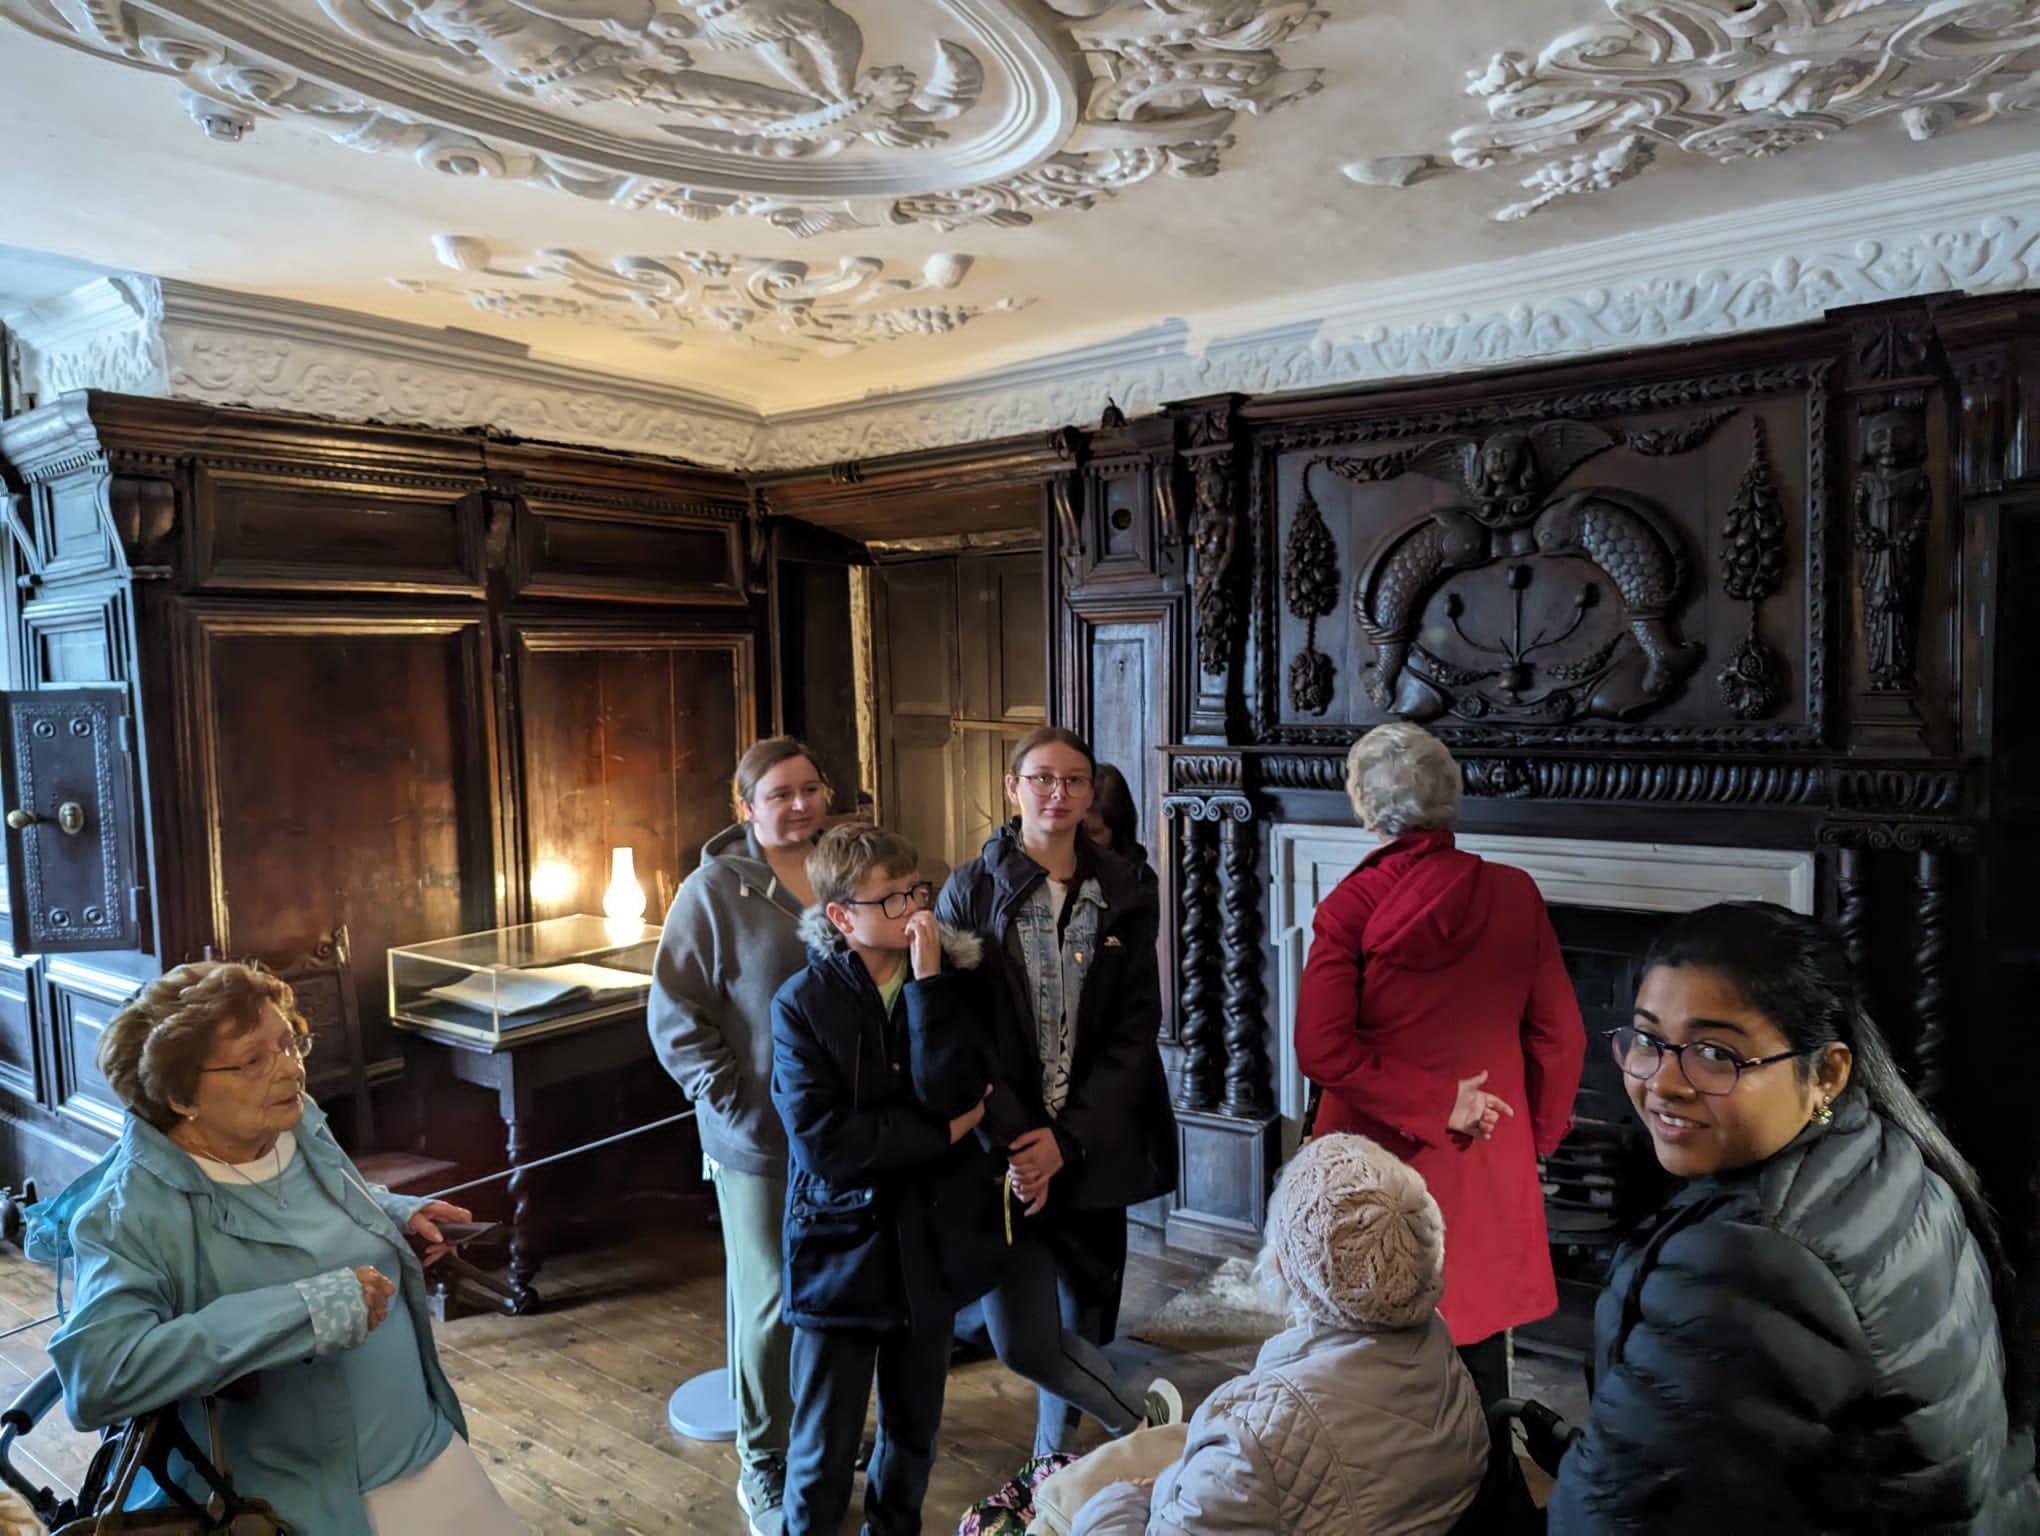  visit to Astley Hall from Jah-Jireh Elderly Care Home